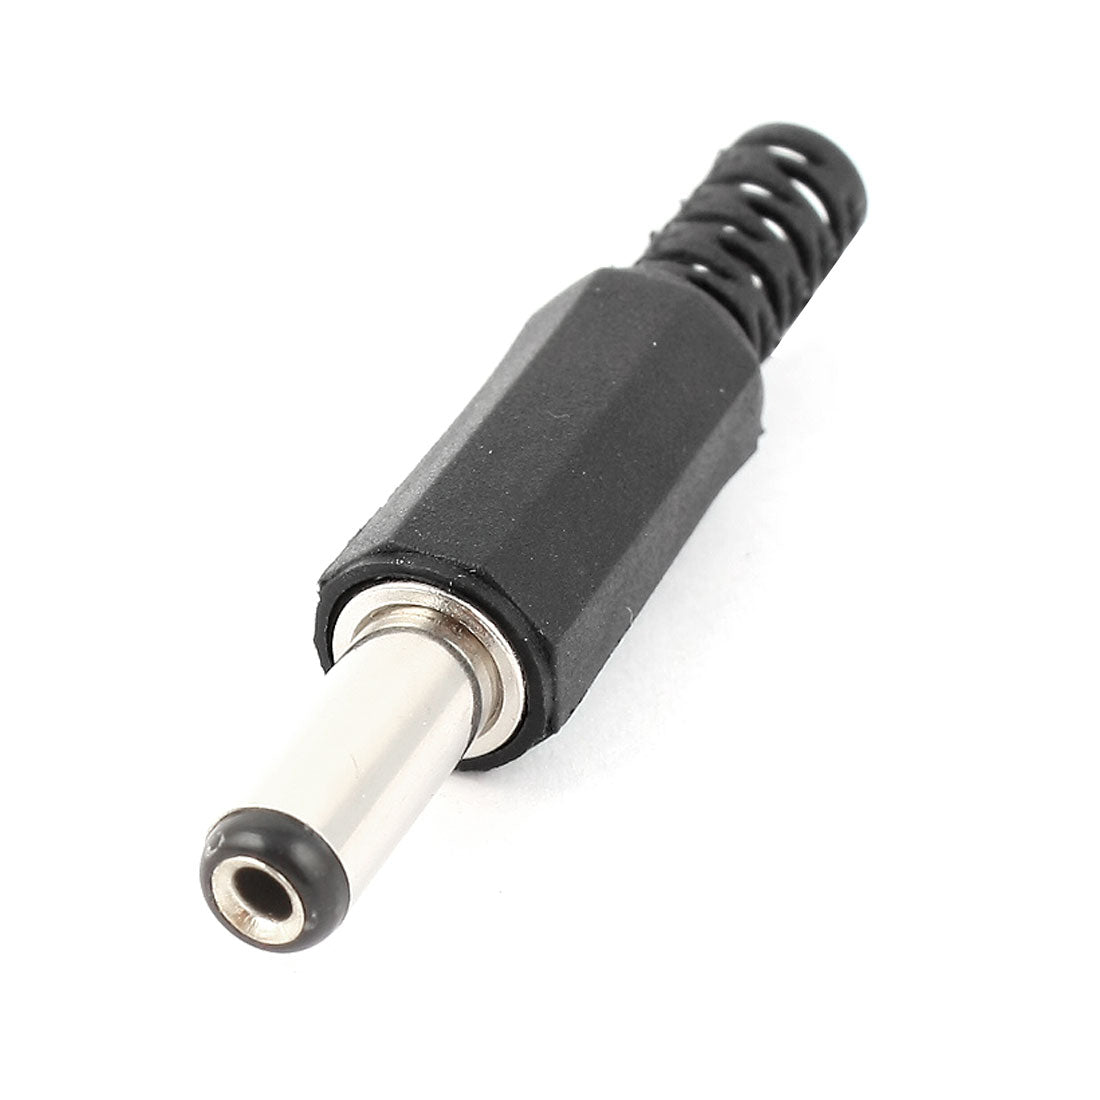 uxcell Uxcell Black 5.5mm x 2.1 mm DC Male Power Cable Connector Adapter